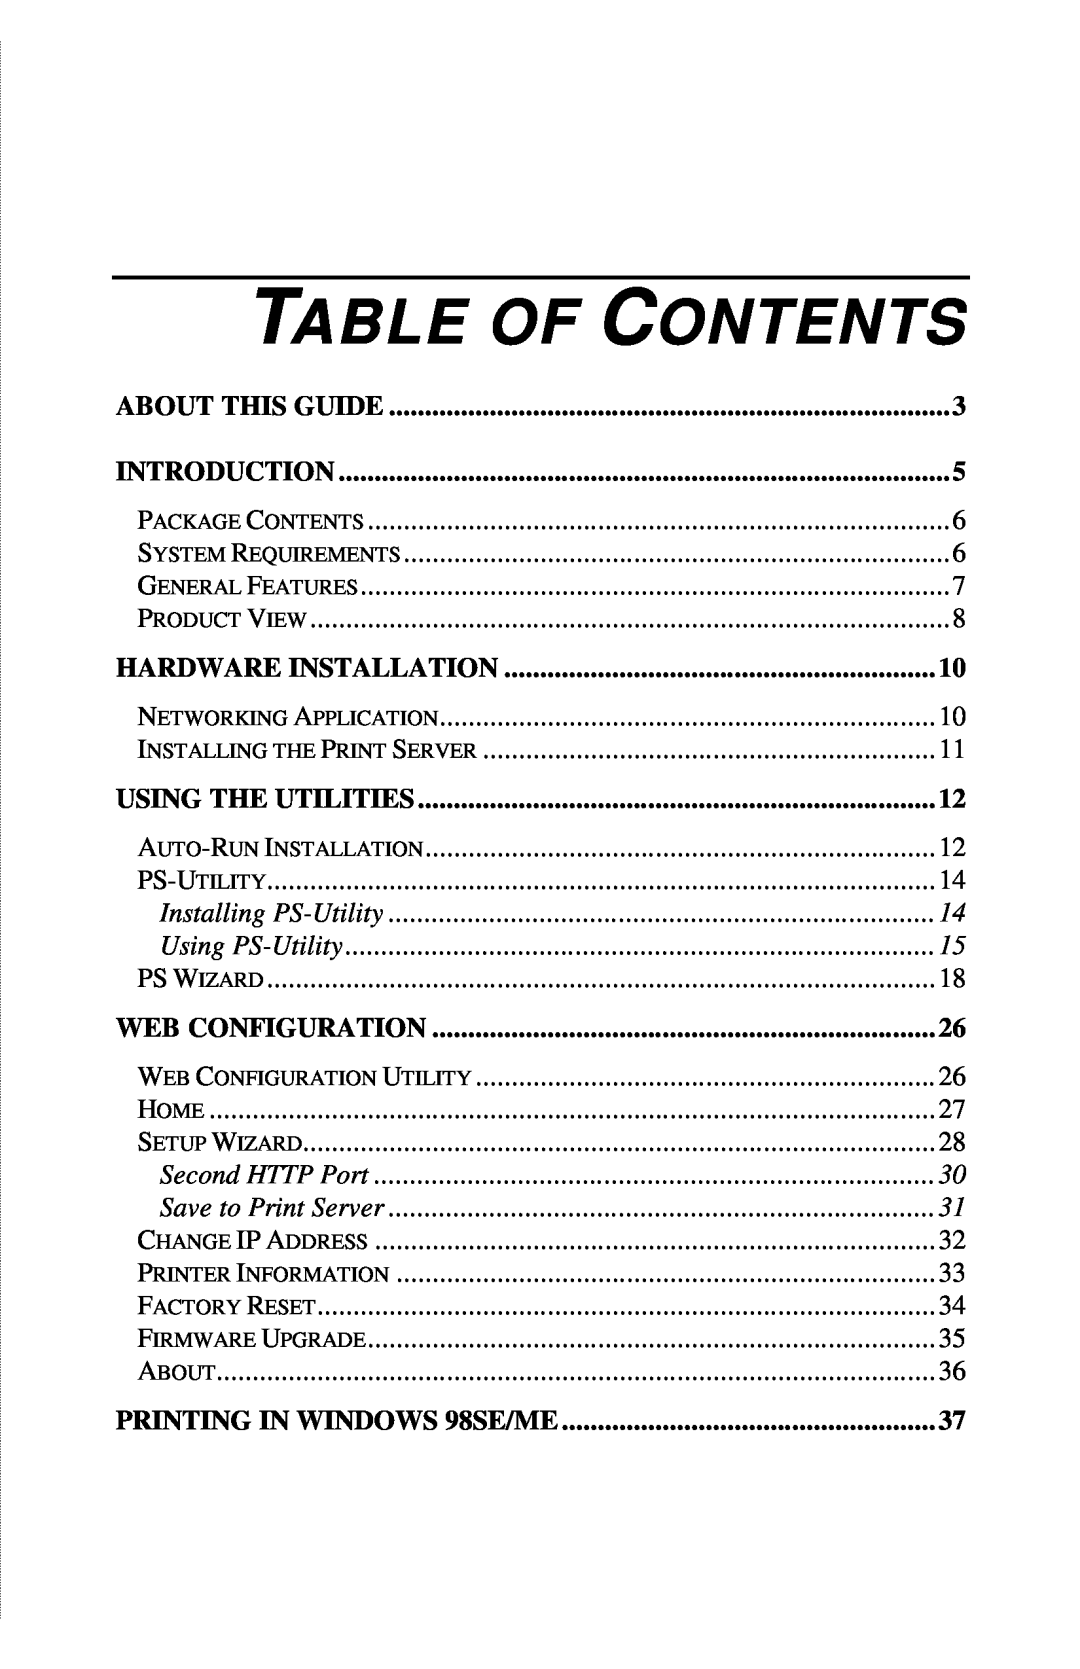 TRENDnet TE100-PIP manual Table Of Contents, About This Guide, Introduction, Hardware Installation, Using The Utilities 